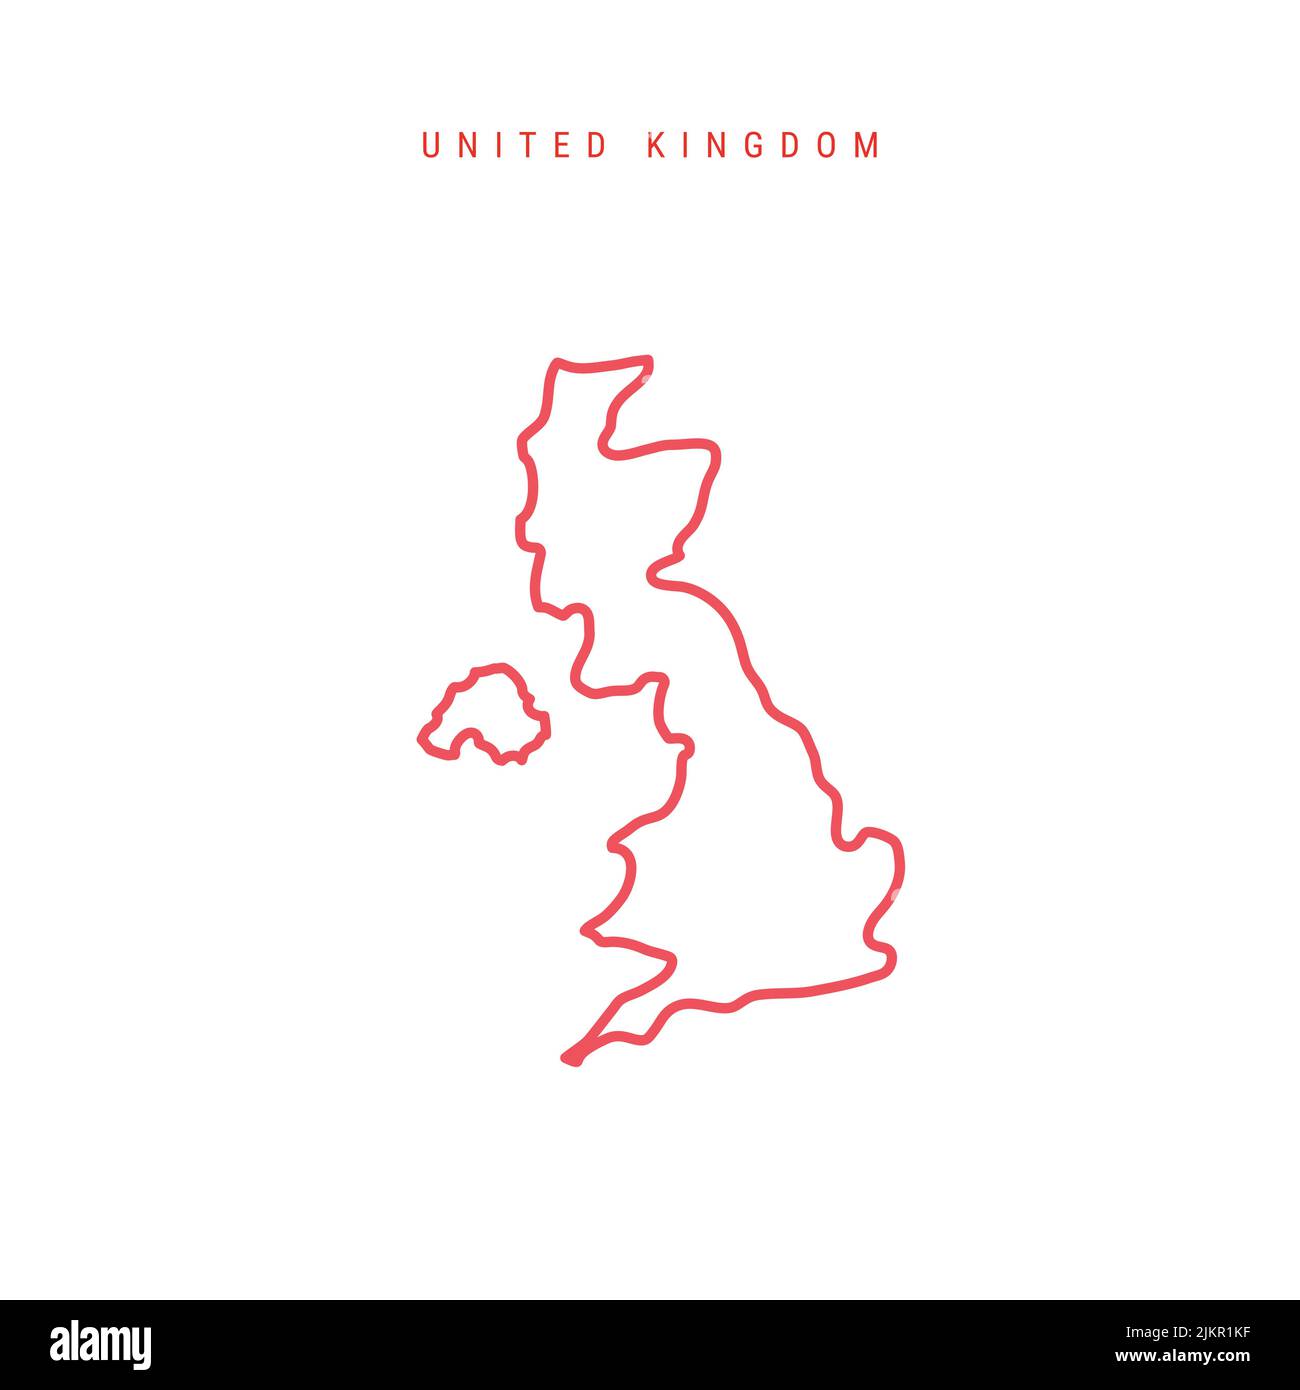 United Kingdom editable outline map. British red border. Country name. Adjust line weight. Change to any color. Vector illustration. Stock Vector